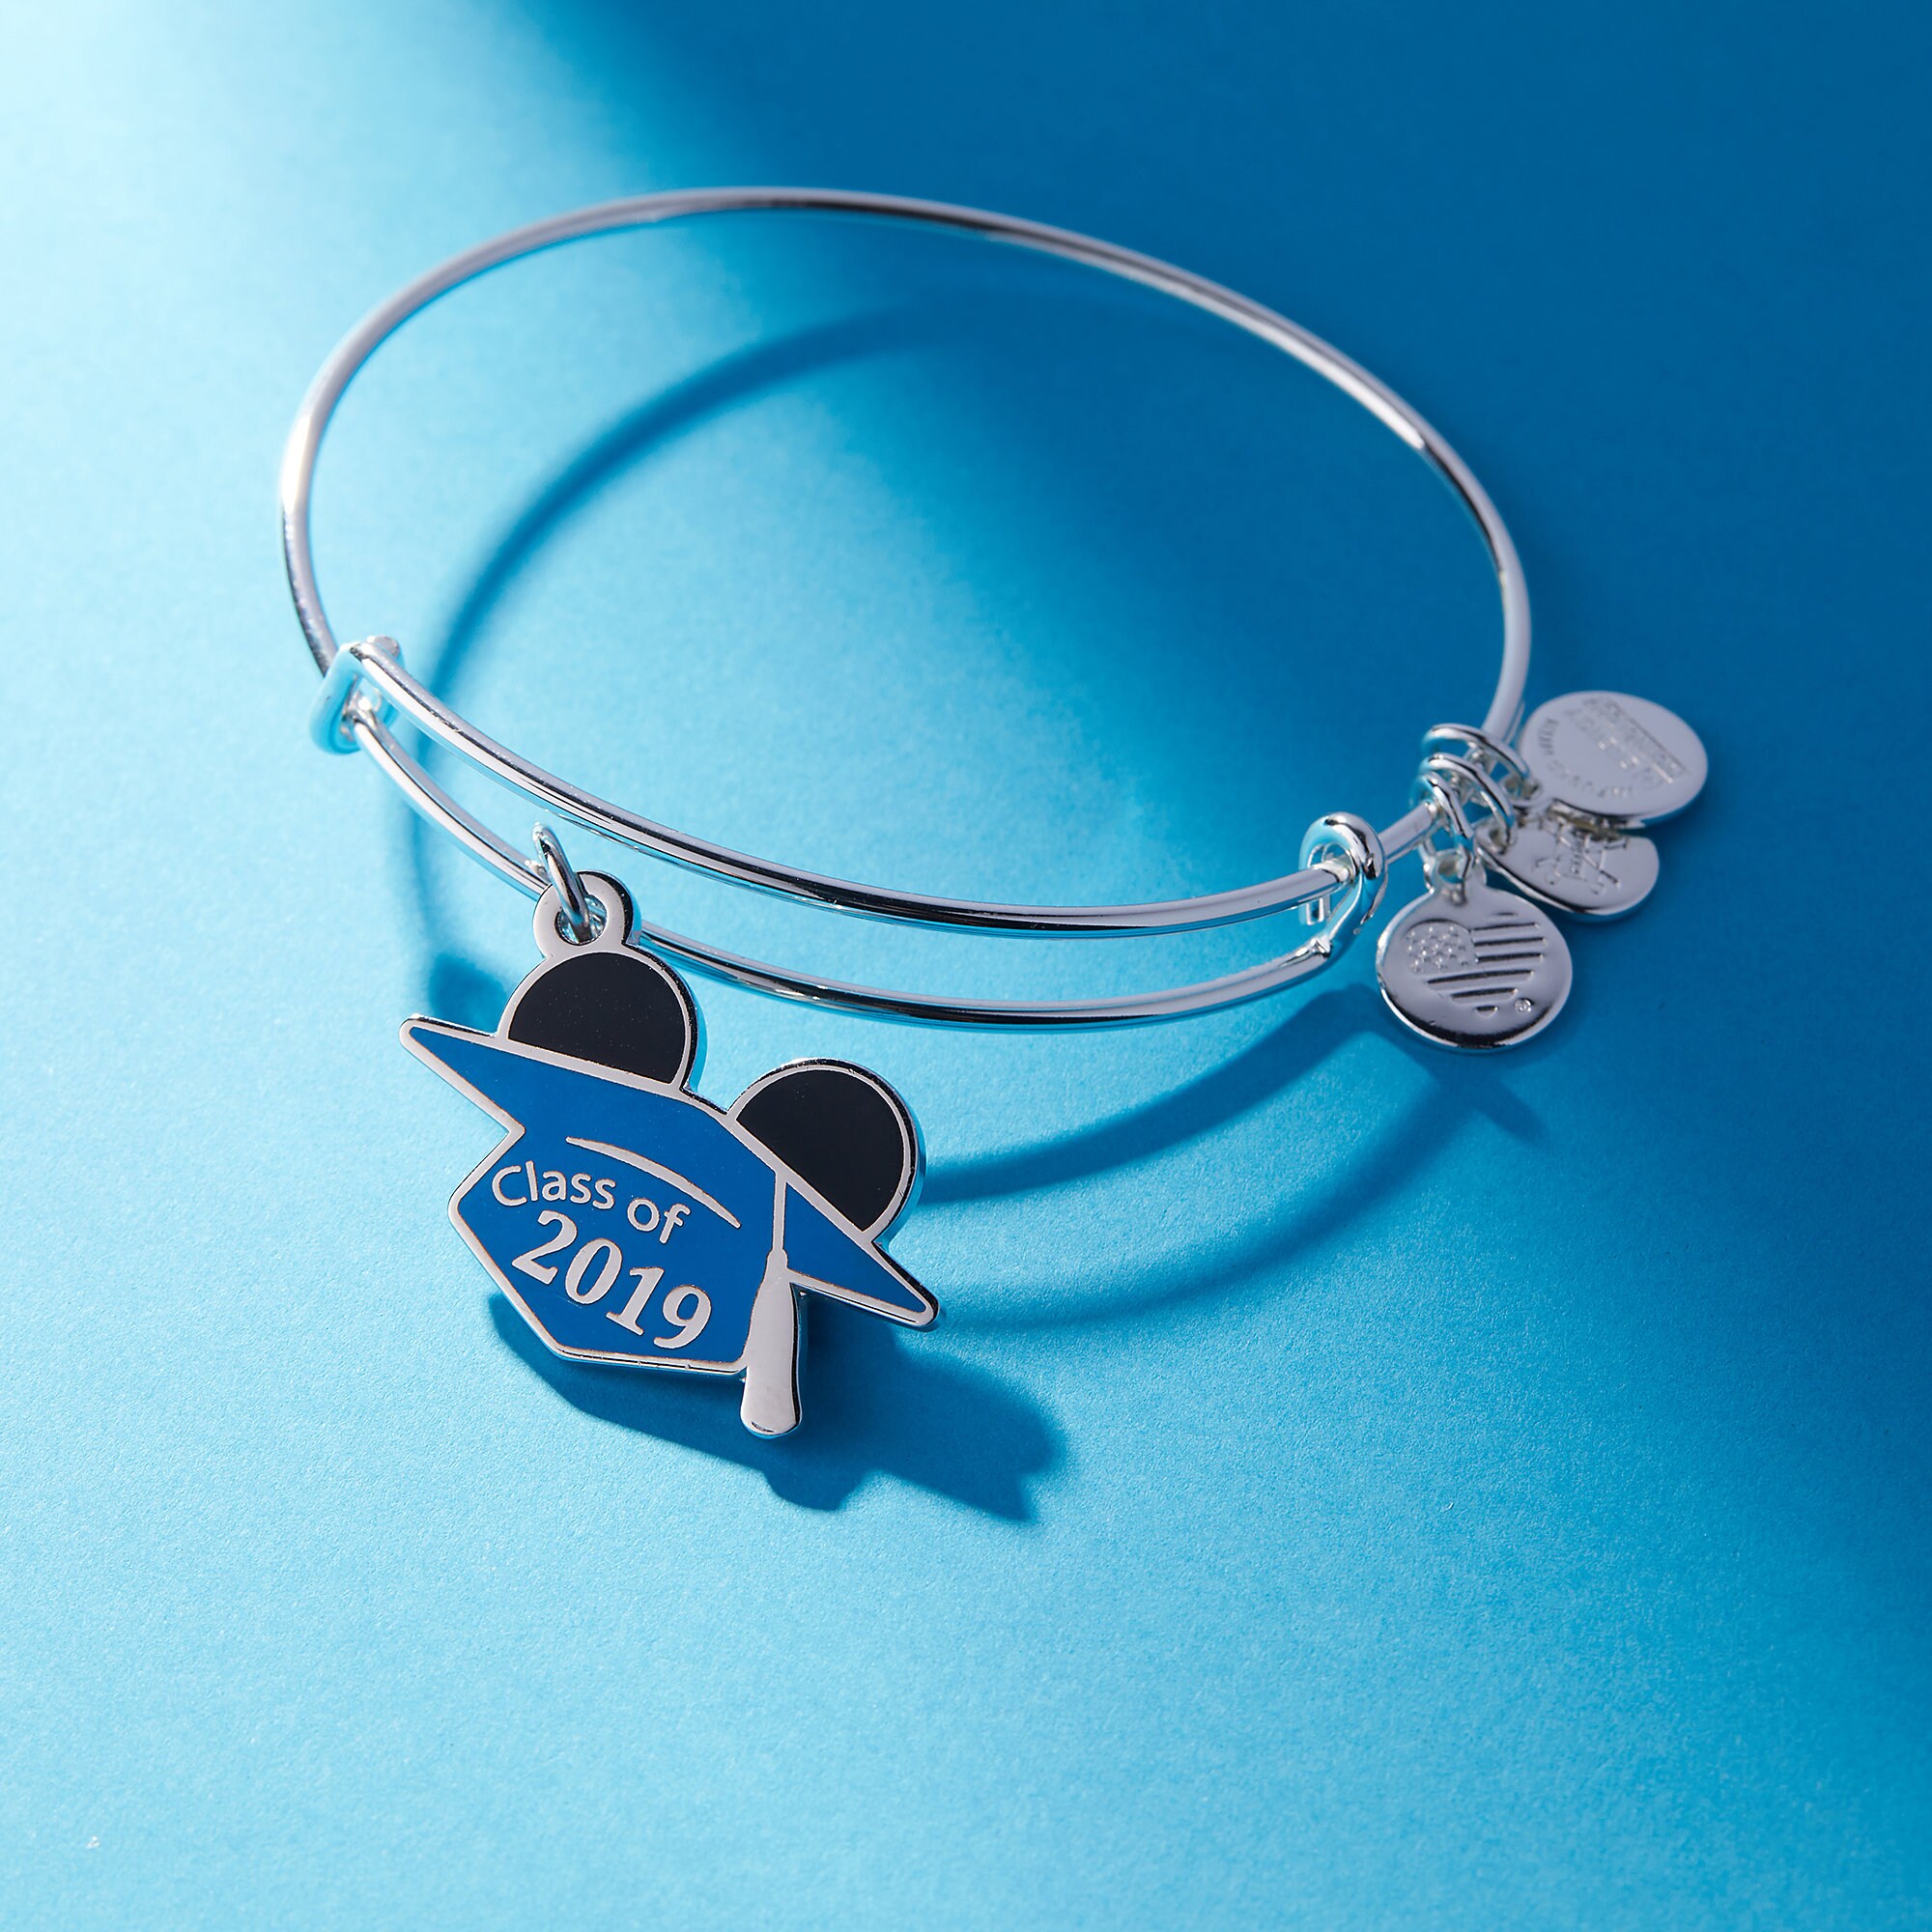 Mickey Mouse Graduation Cap Bangle by Alex and Ani - Class of 2019